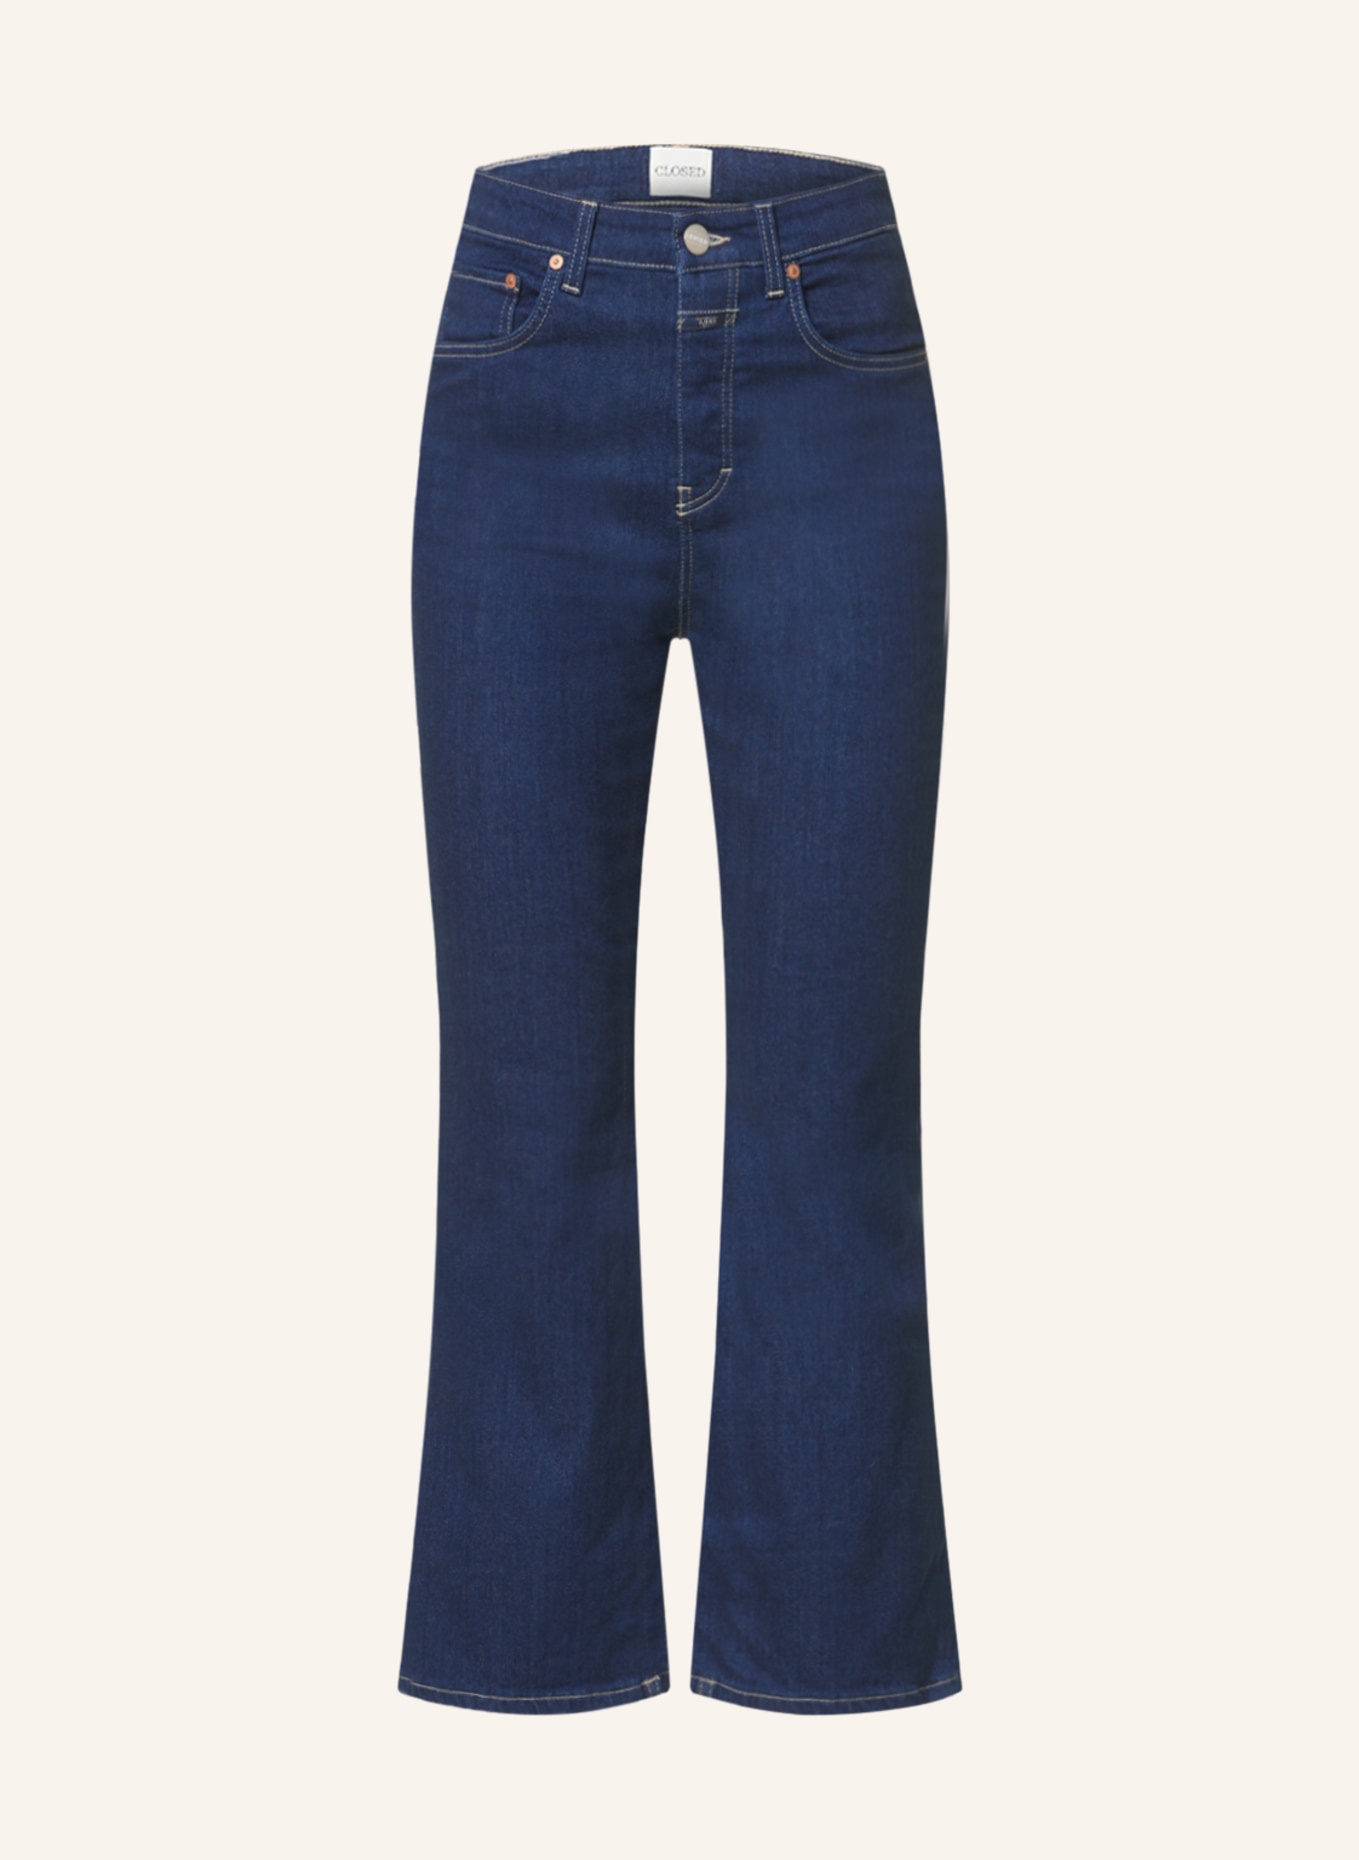 CLOSED Flared jeans in dbl dark blue